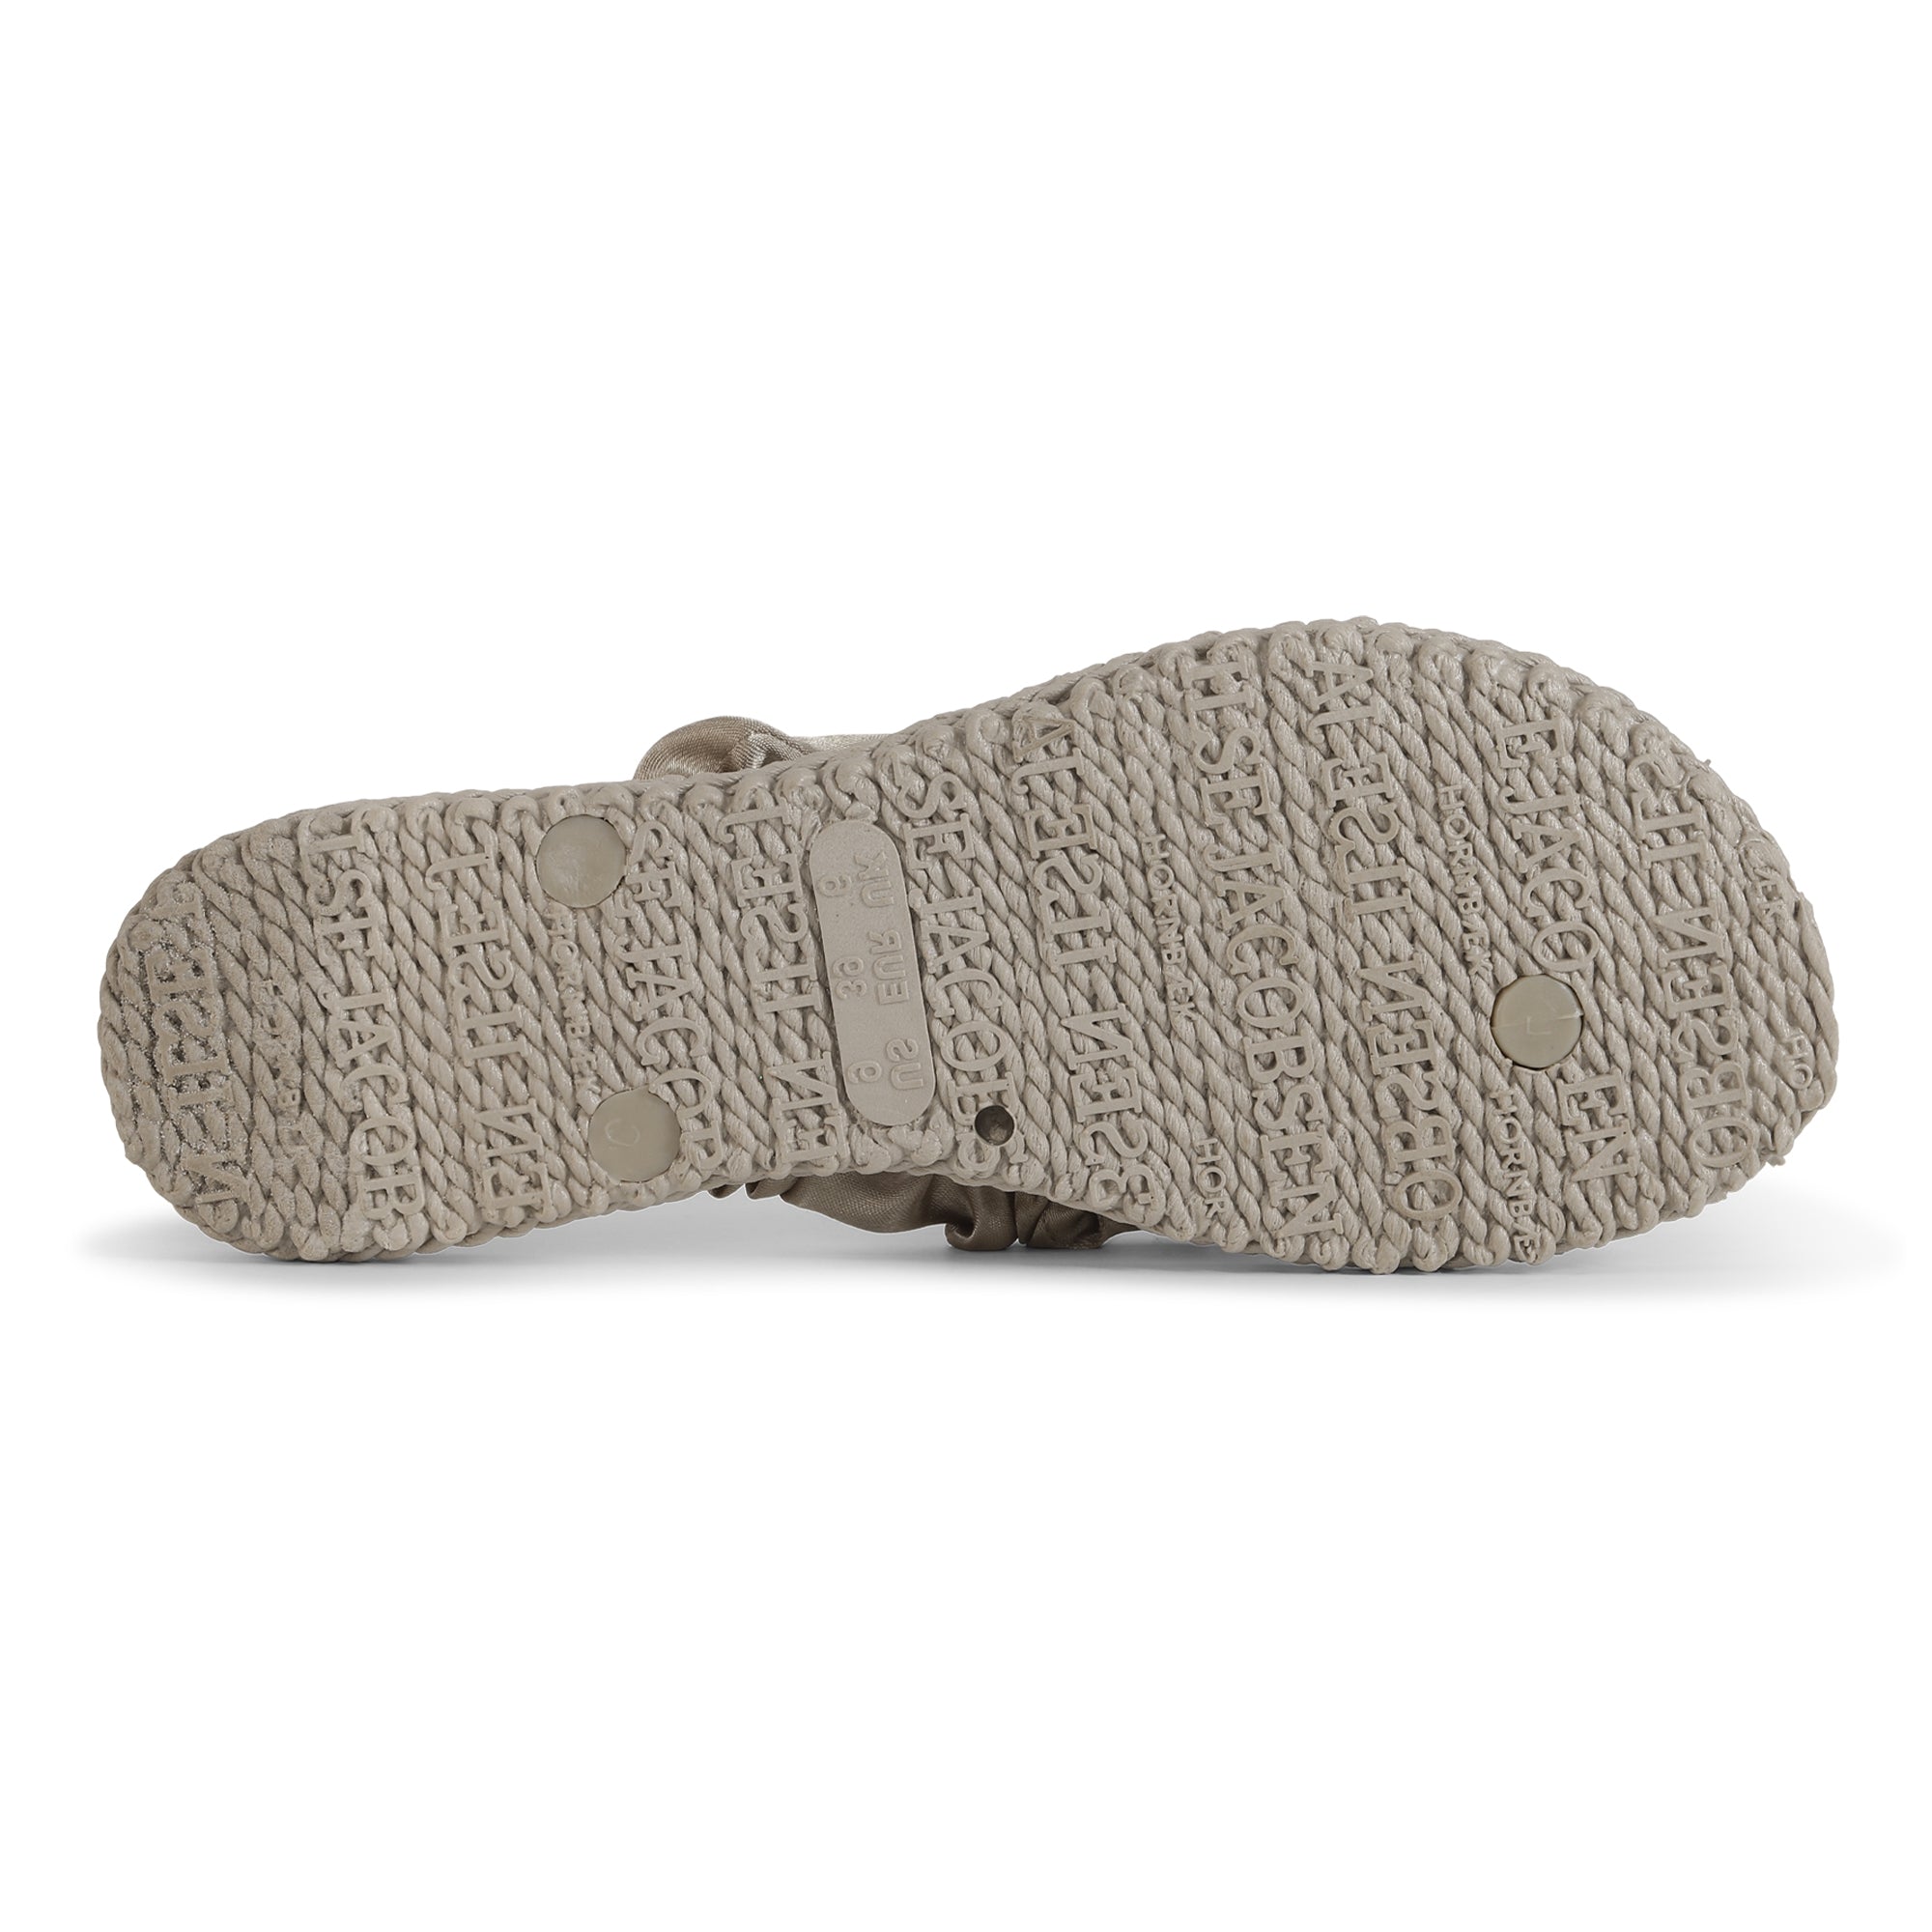 Slippers met stoffen band CHEERFUL06 - 157 Incense | Incense